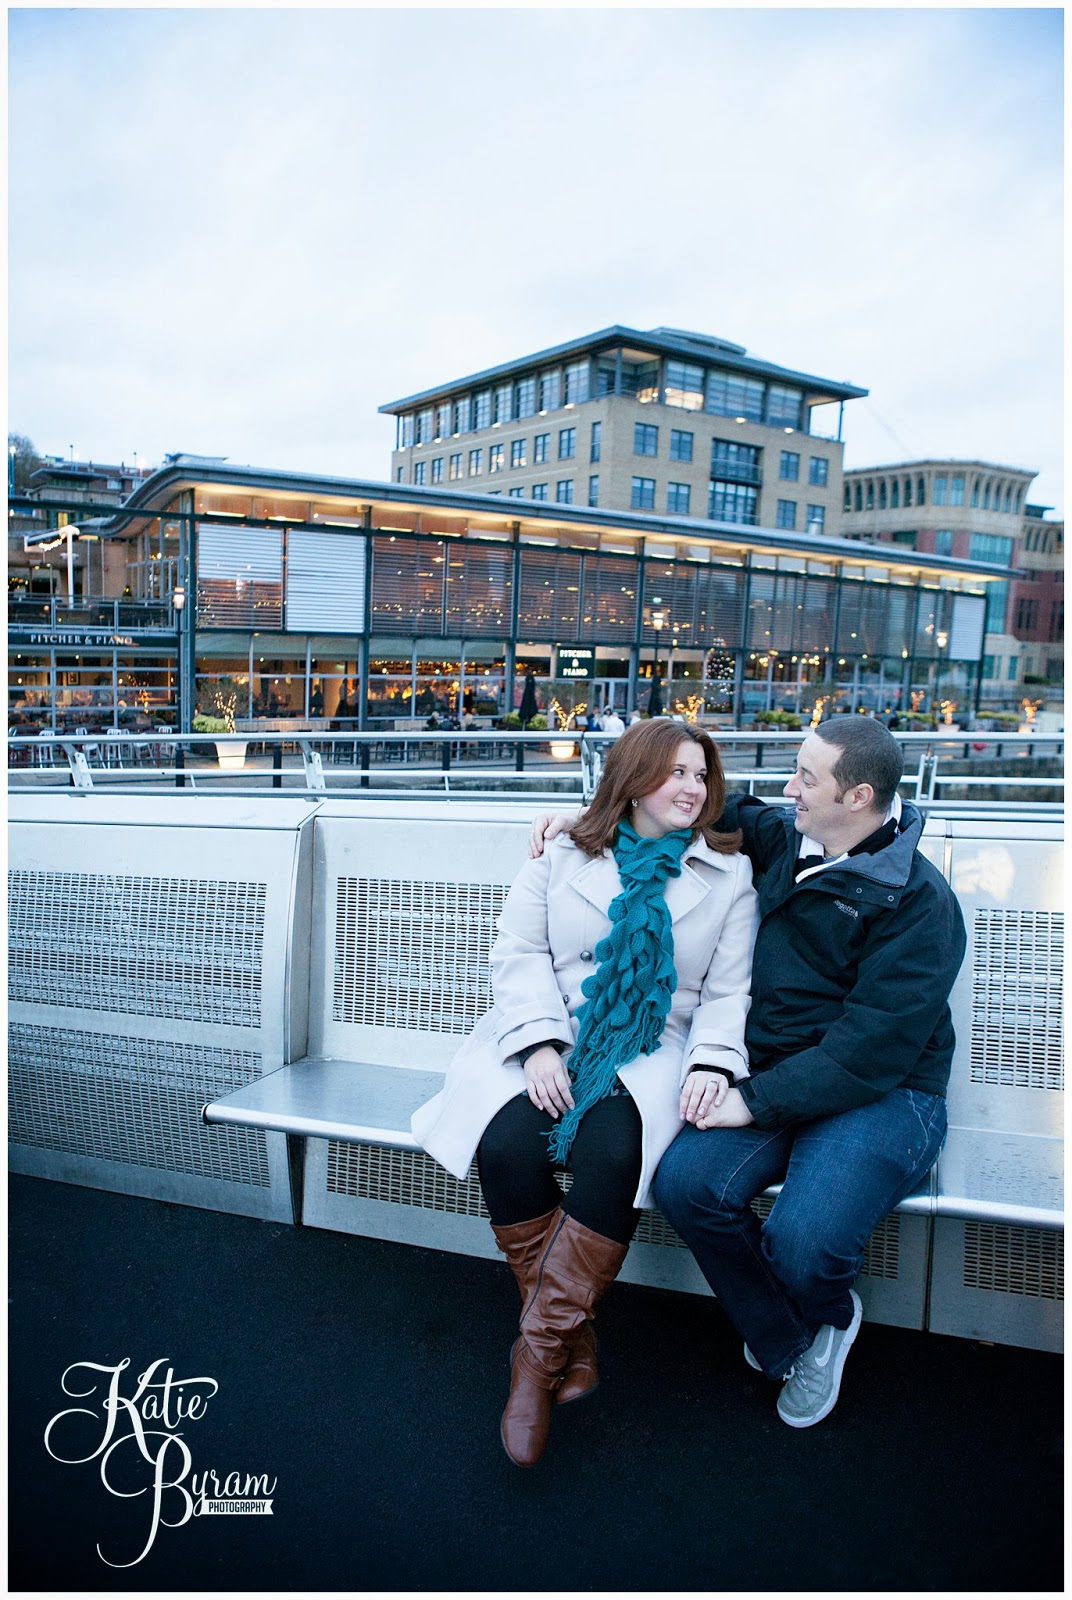 newcastle quayside engagement, newcastle pre-wedding shoot, newcastle quayside portraits, tyne bride engagement, christmas in newcastle, fenwicks window, millenium bridge engagement, pitcher and piano newcastle, olive and bean cafe, the baltic wedding, newcastle wedding photographer, katie byram photography